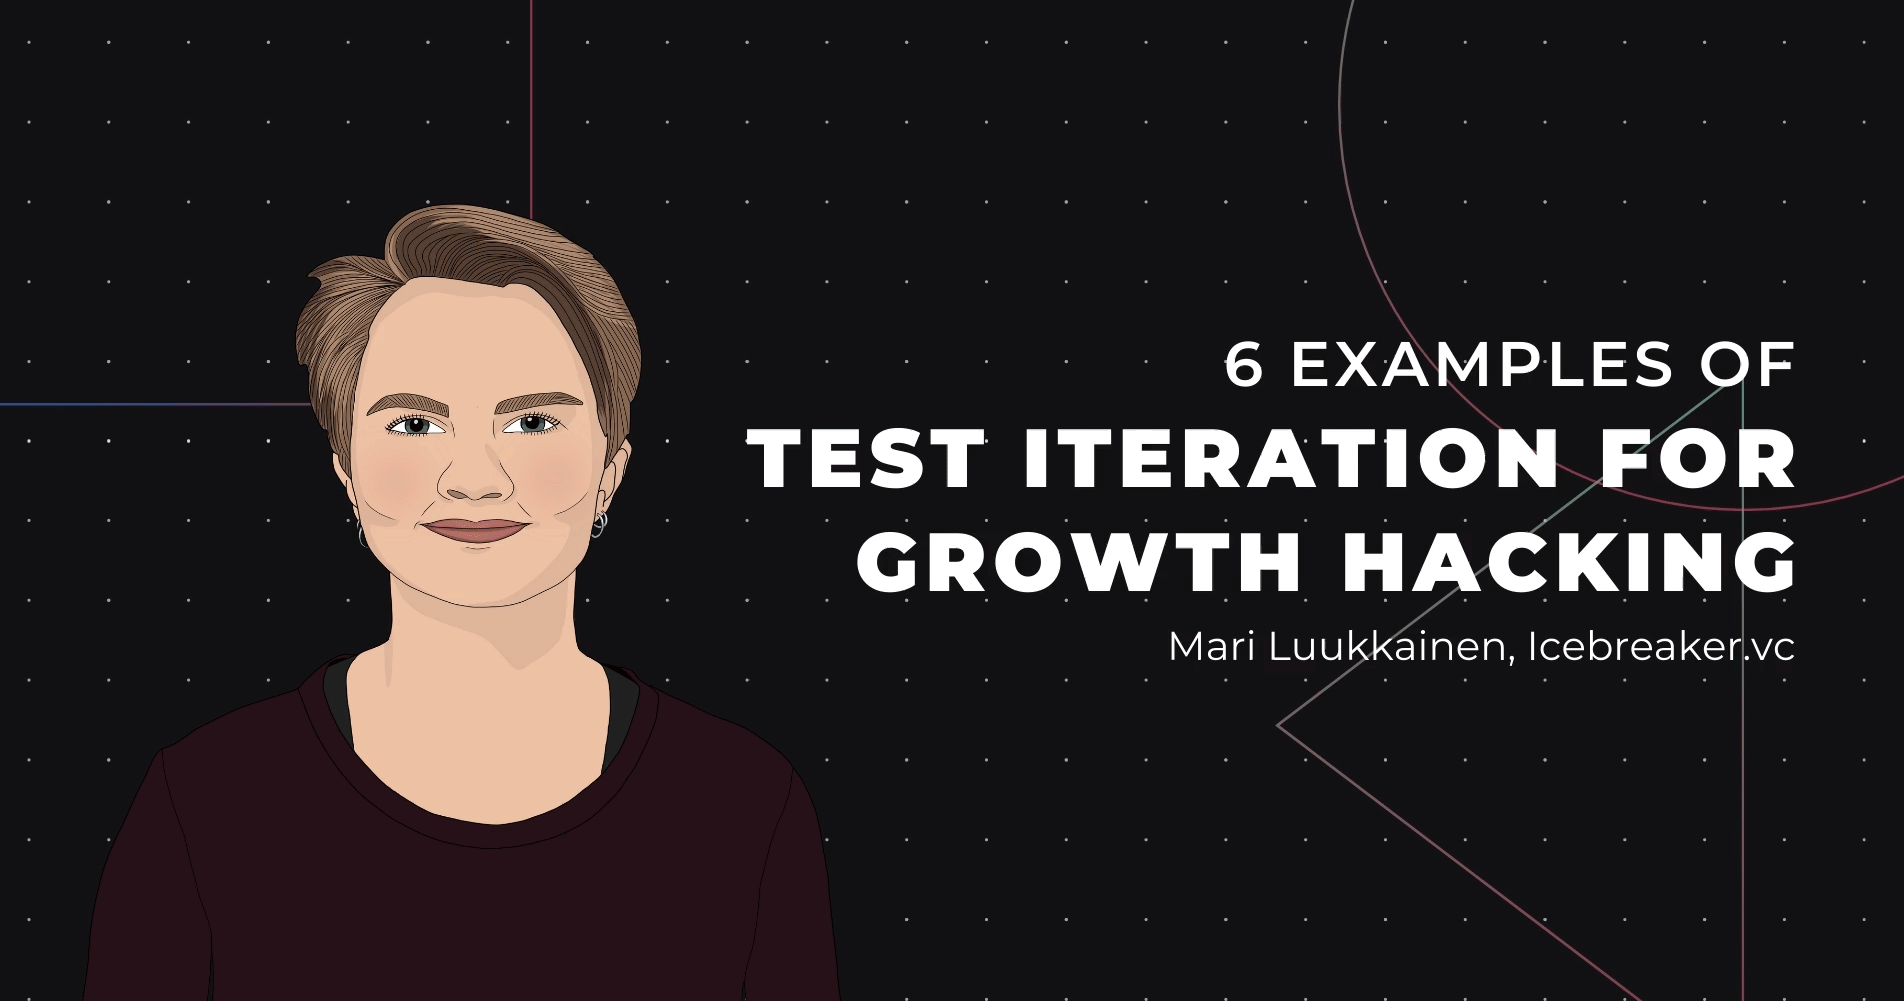 6 examples of test iteration for growth hacking